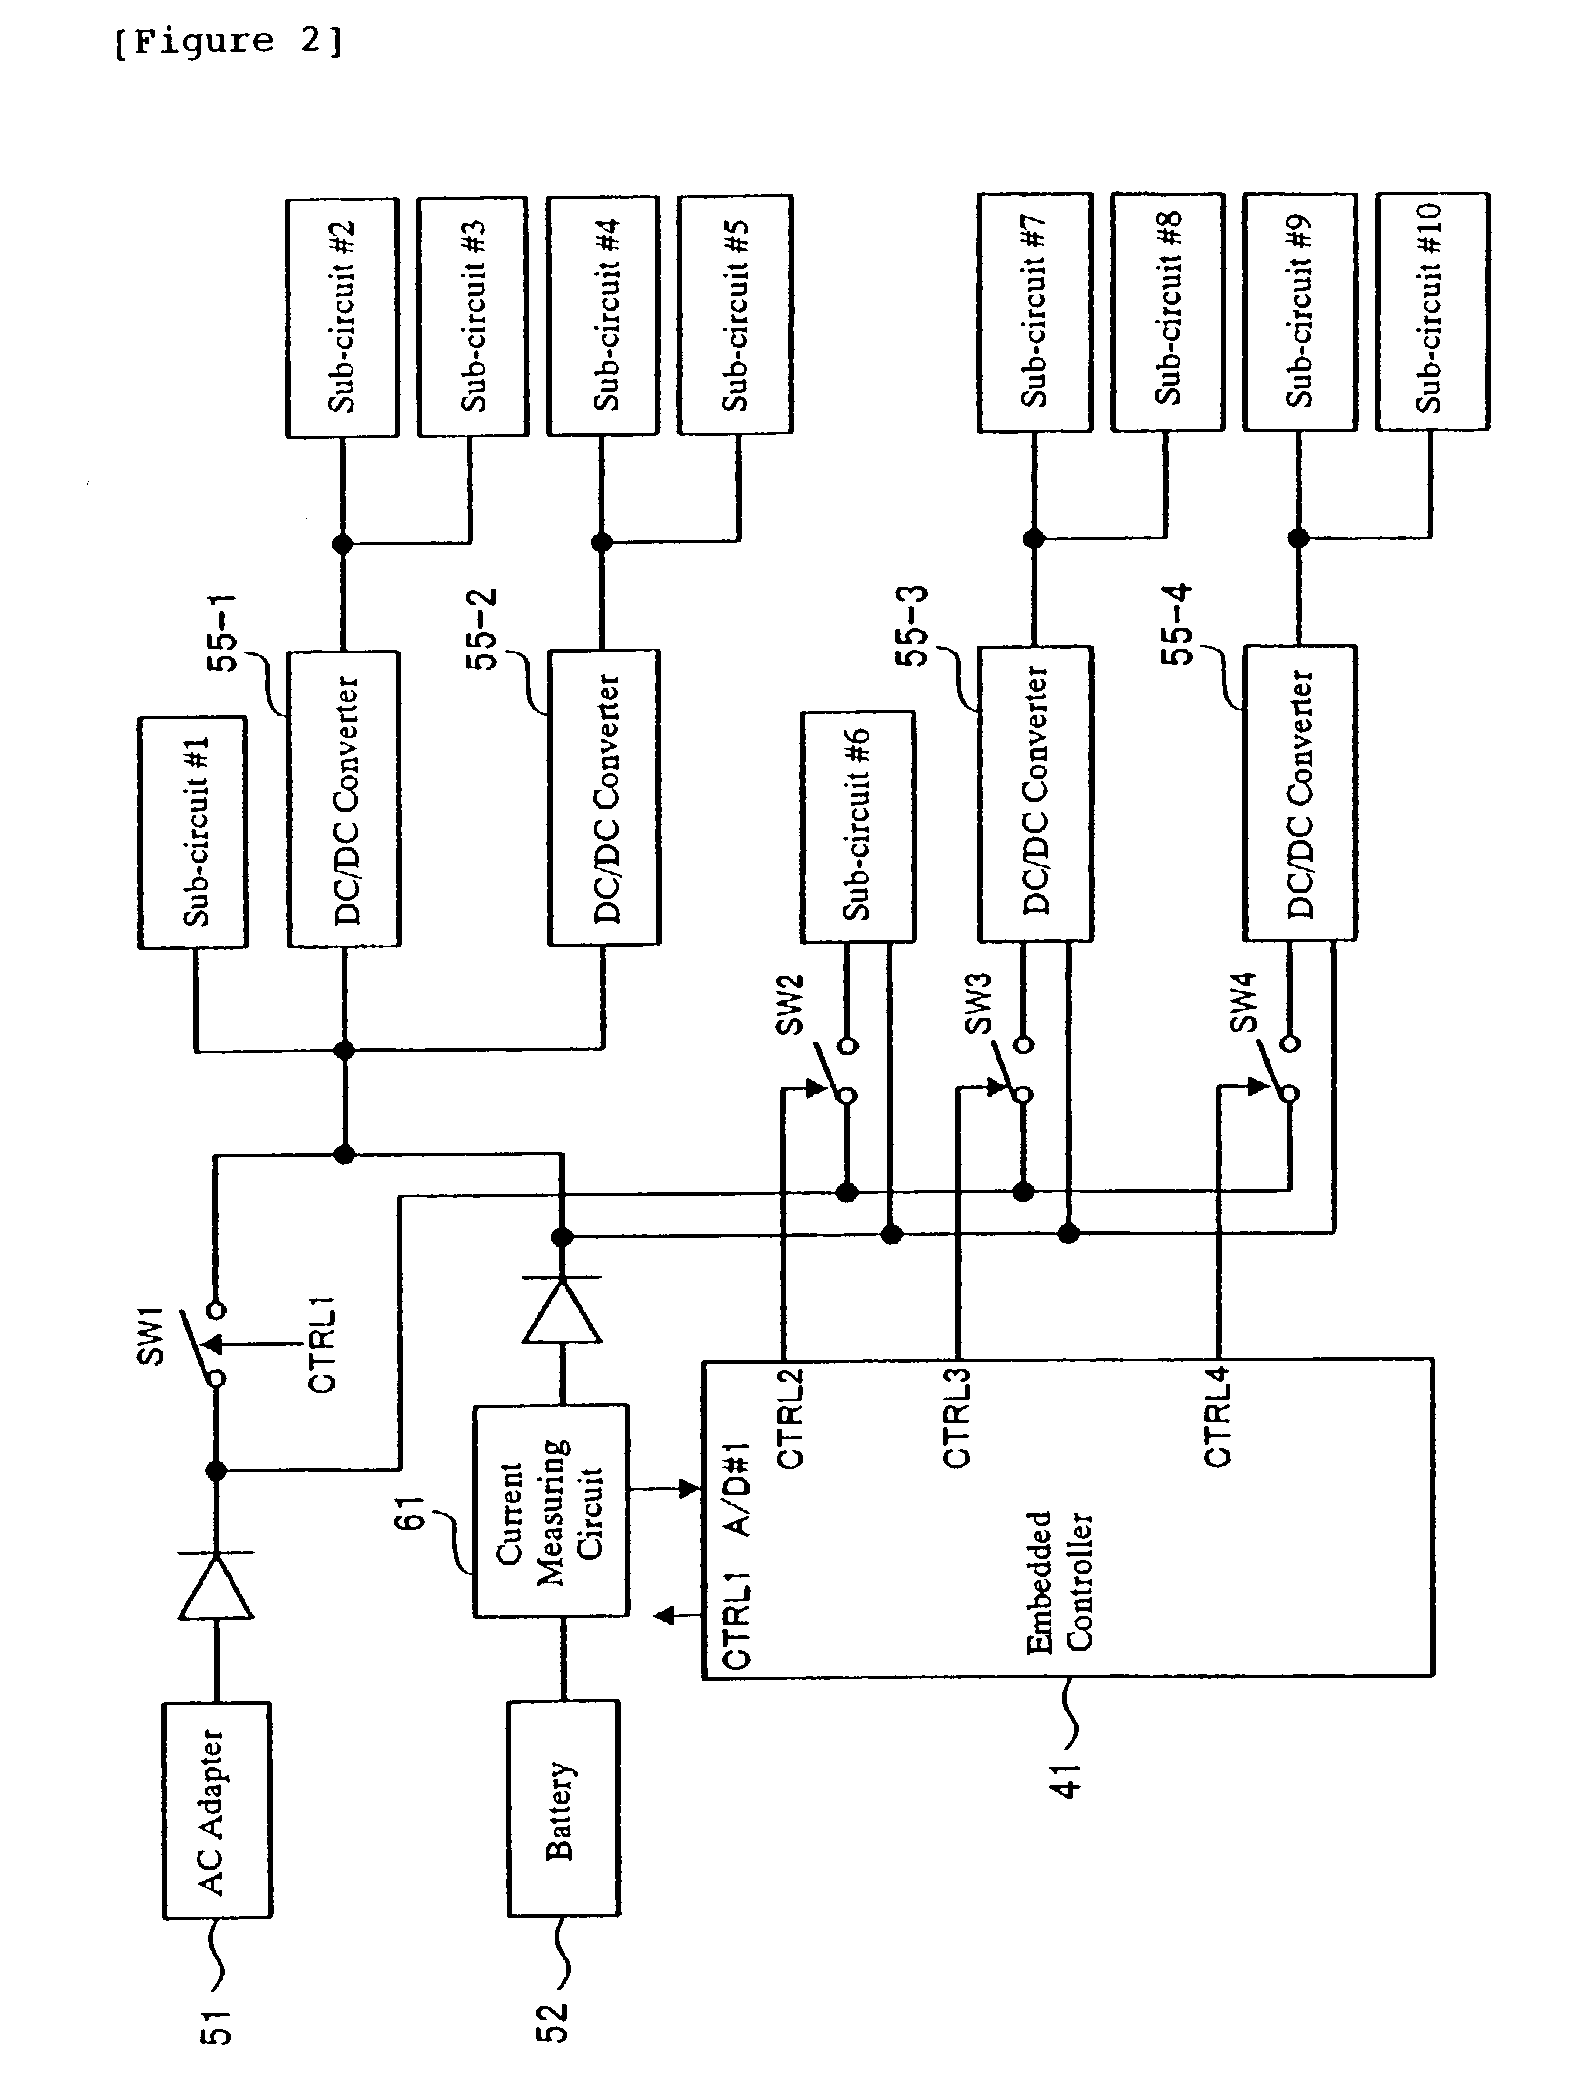 Electrical apparatus, computer, and power switching method